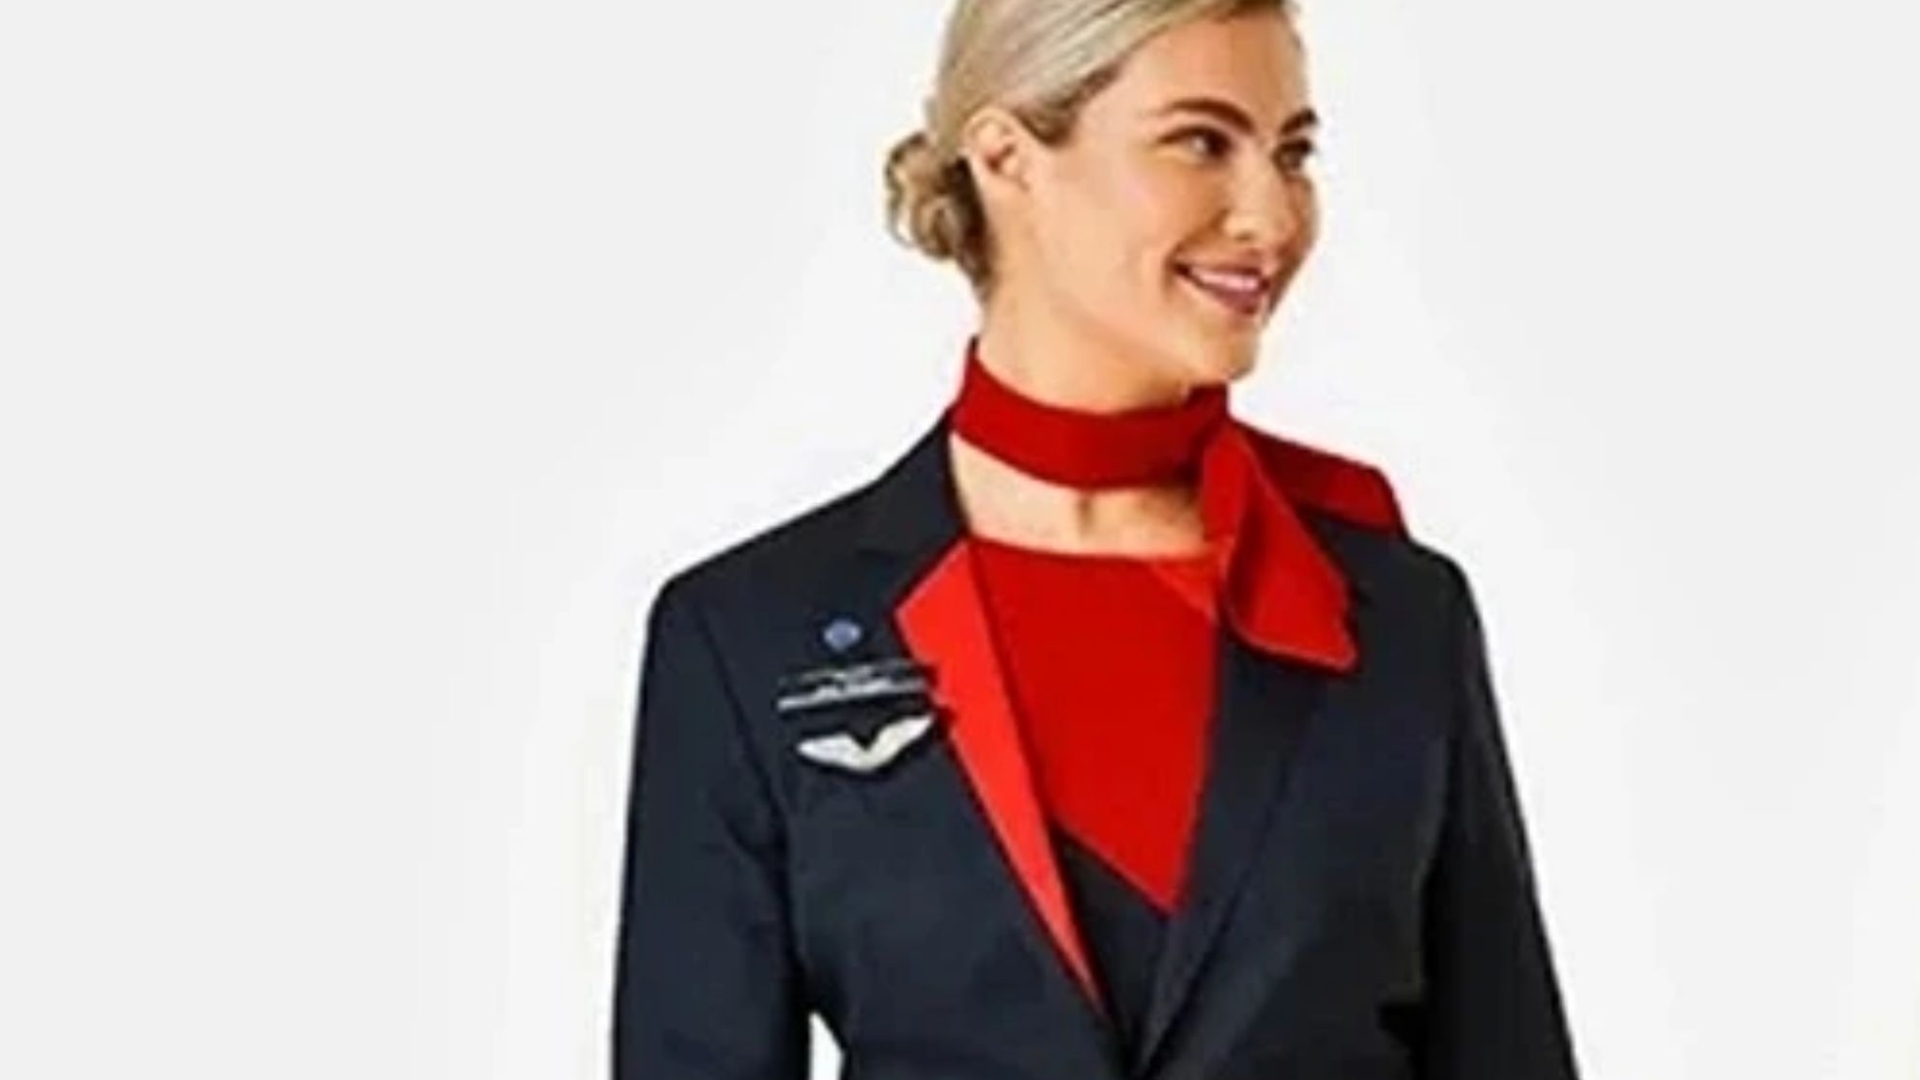 Male staff can now wear make-up, so stewardesses on Qantas airlines are no longer required to use it.